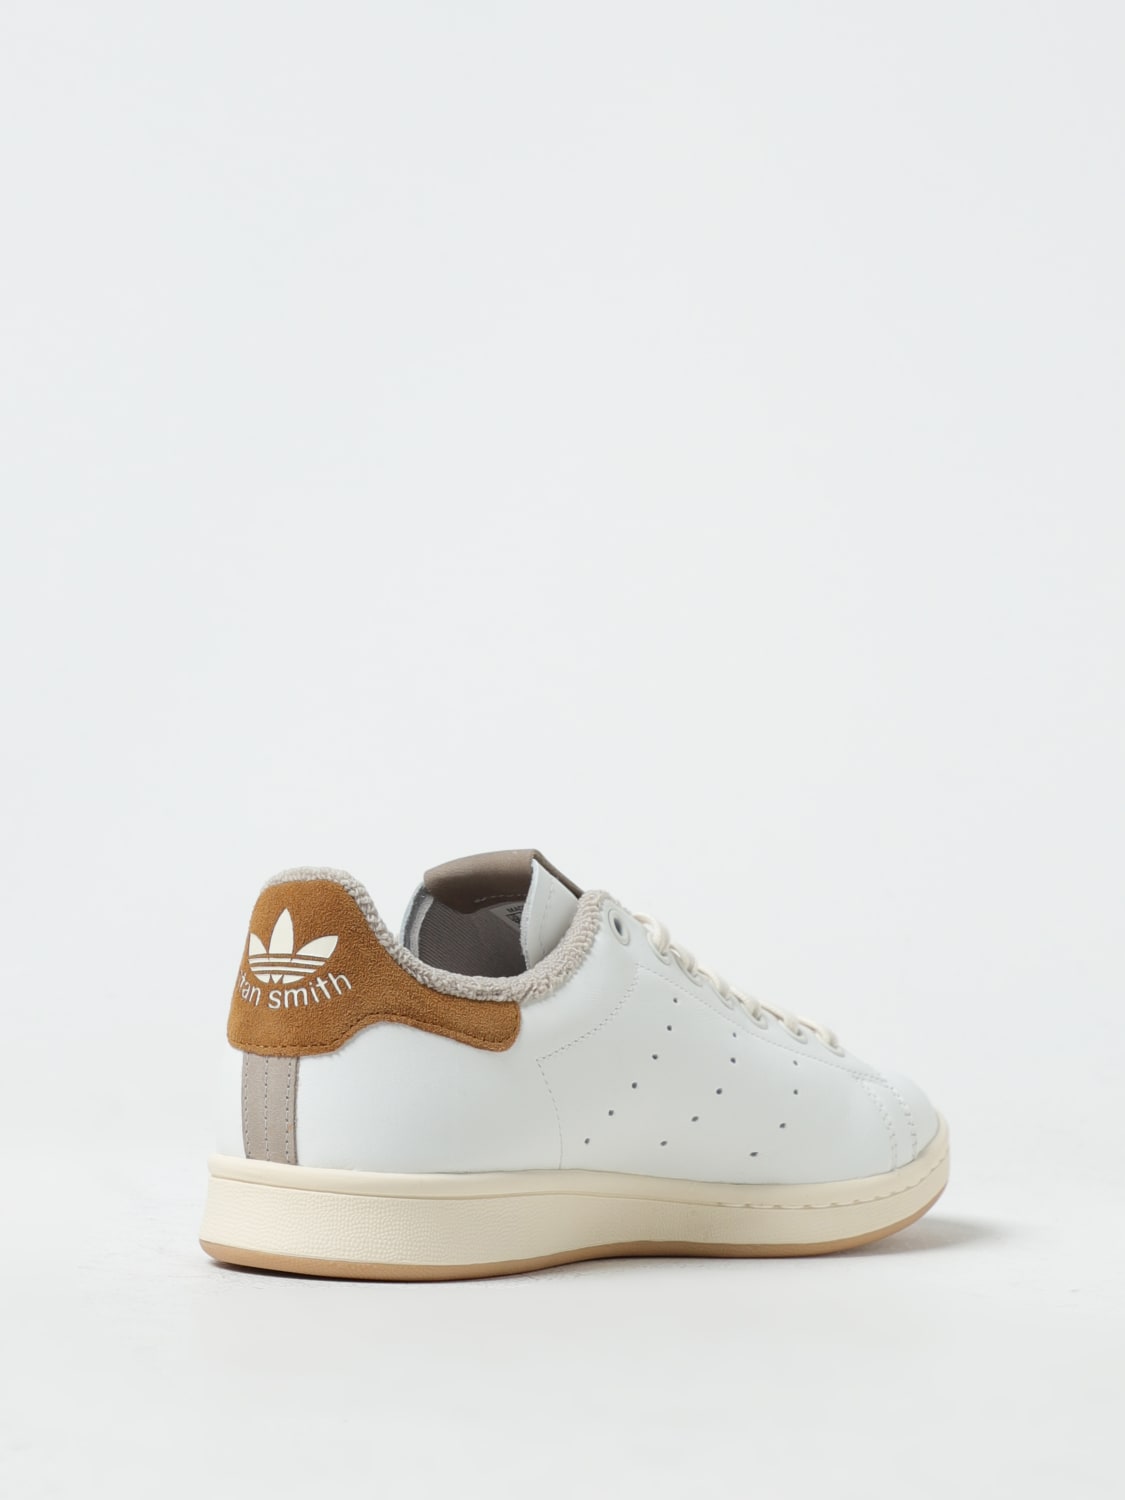 at ADIDAS ID2031 online Stan sneakers - in leather | Originals ORIGINALS: White Smith Adidas sneakers